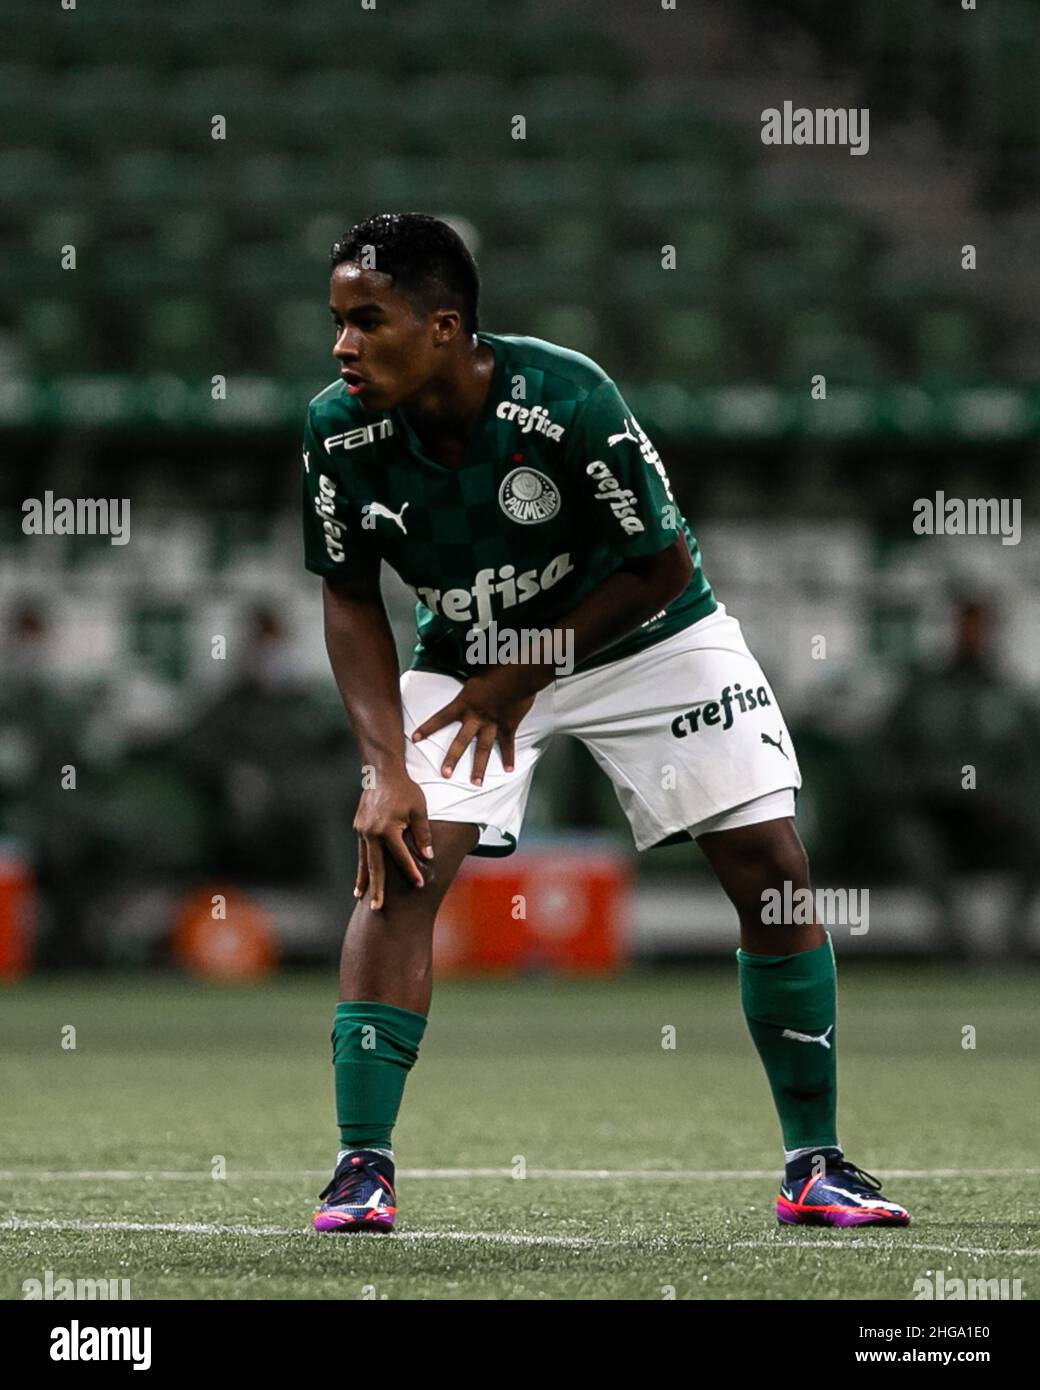 Sao Paulo, Brazil. 19th Dec, 2021. Endrick of Palmeiras. Barcelona have been linked with Palmeiras starlet Endrick, the suggestion is that they may leave the player remain at Palmeiras for up to two seasons if the transfer goes through Fernando Roberto/SPP Credit: SPP Sport Press Photo. /Alamy Live News Stock Photo